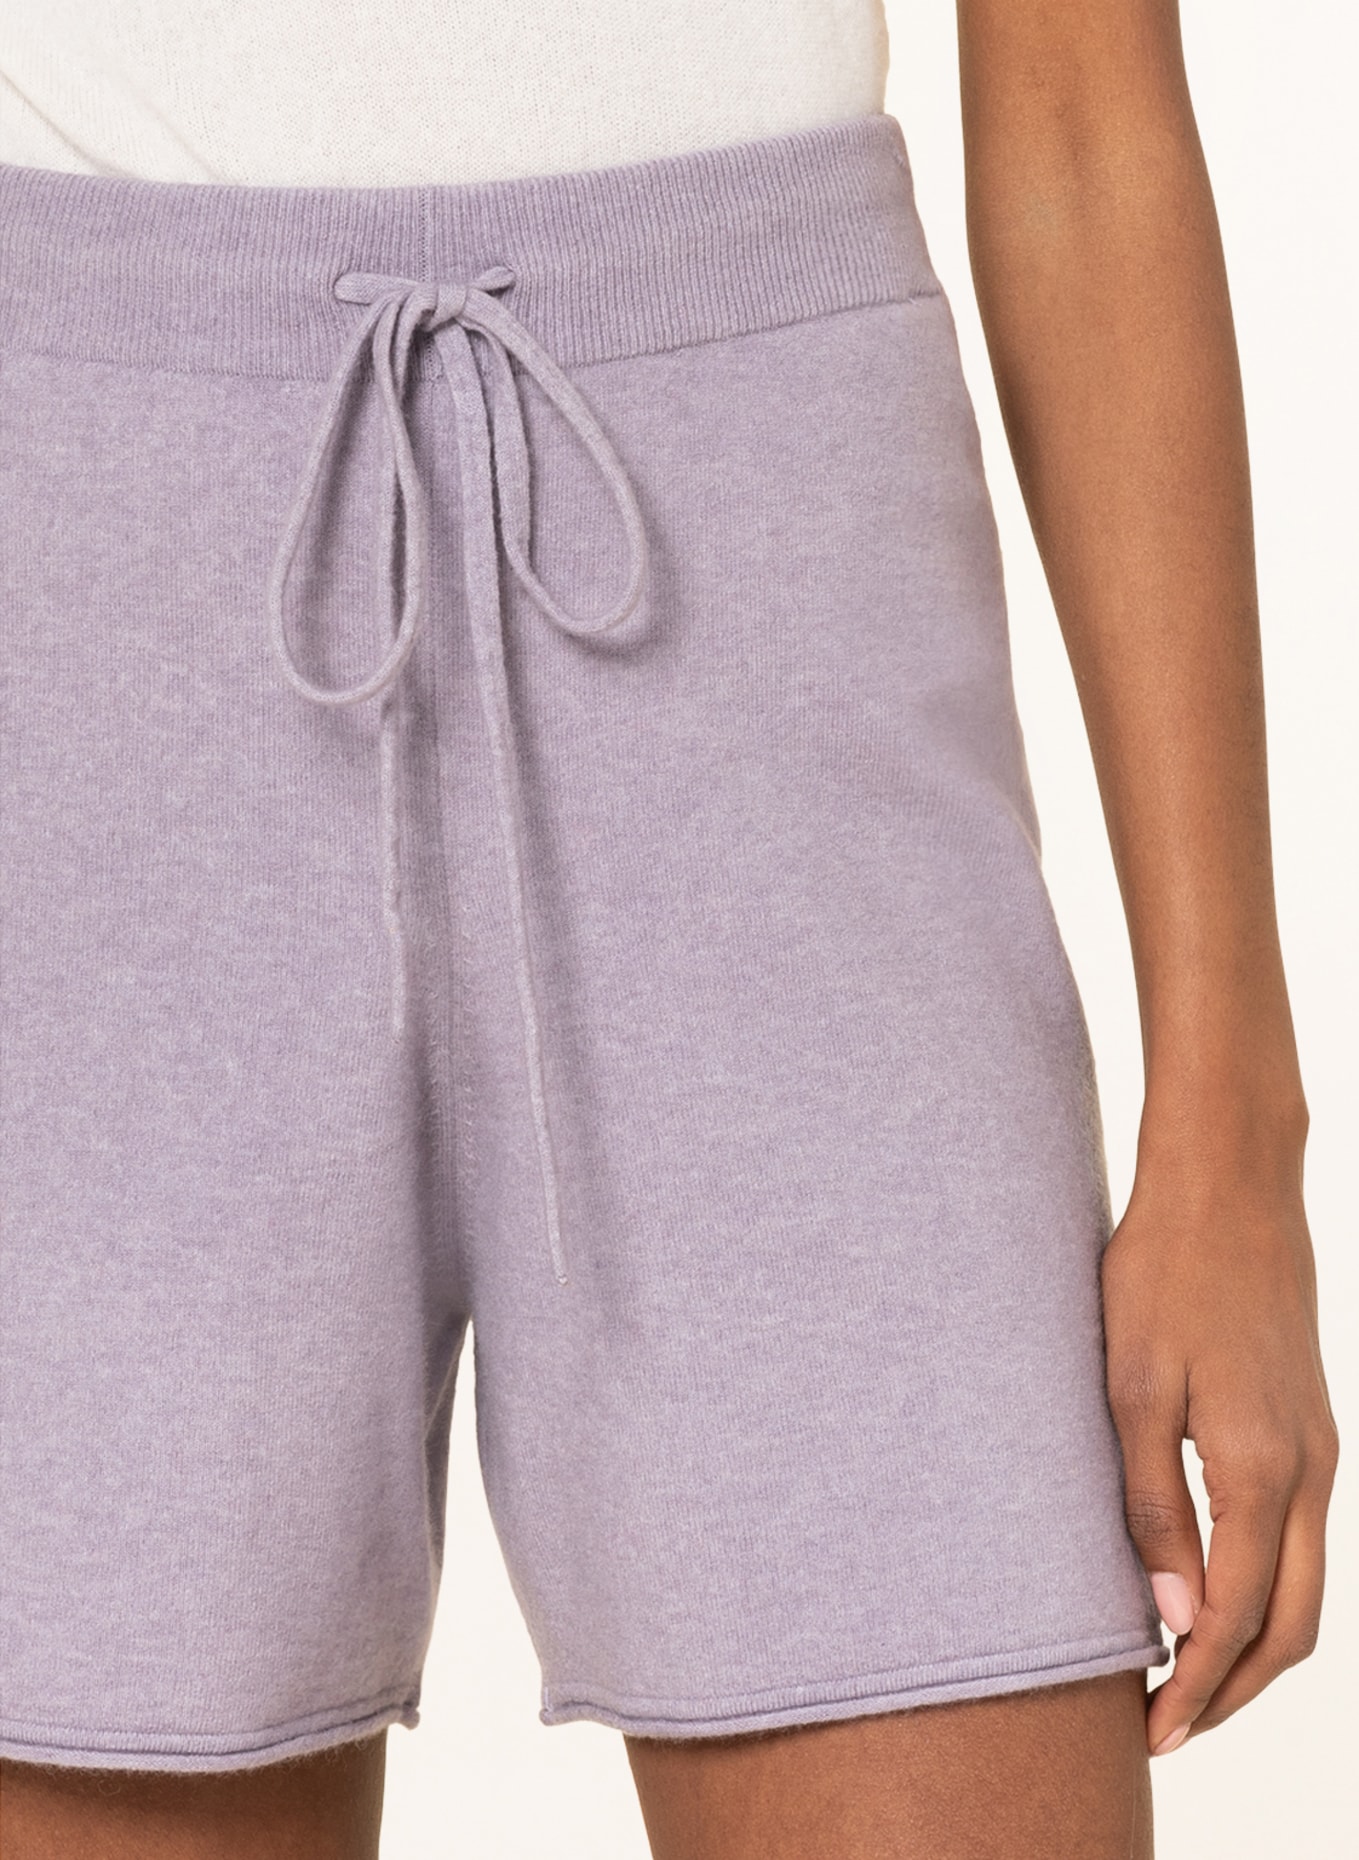 (THE MERCER) N.Y. Knit shorts with merino wool, Color: LIGHT PURPLE (Image 5)